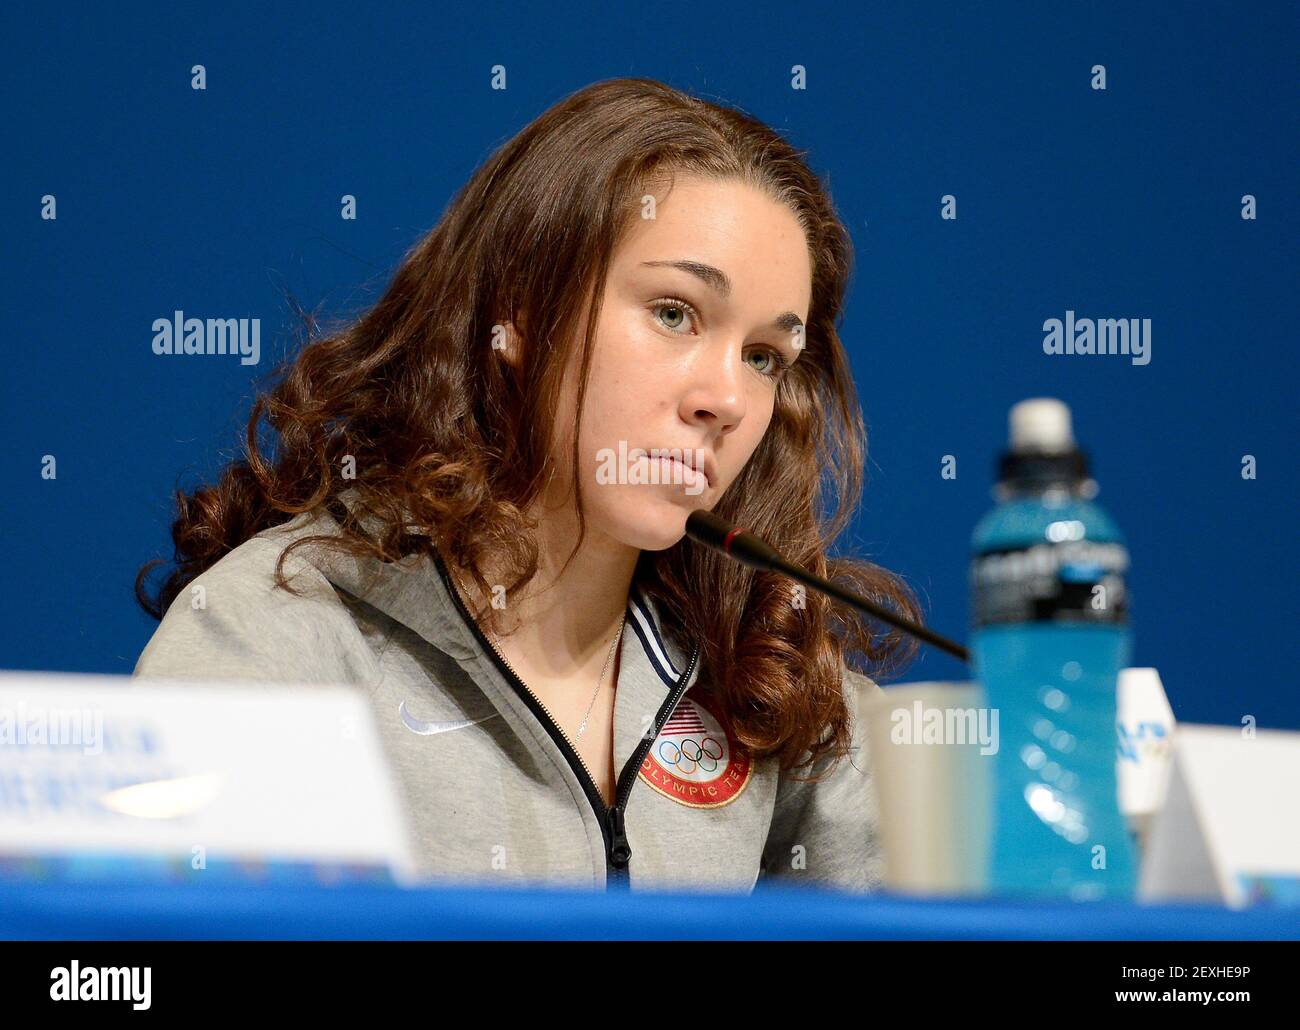 USA ski jumper Sarah Hendrickson listens to a question during a news conference in the Main Media Center at the Winter Olympics in Sochi, Russia on February 7, 2014. (Photo by Chuck Myers/TNS/Sipa USA) Stock Photo